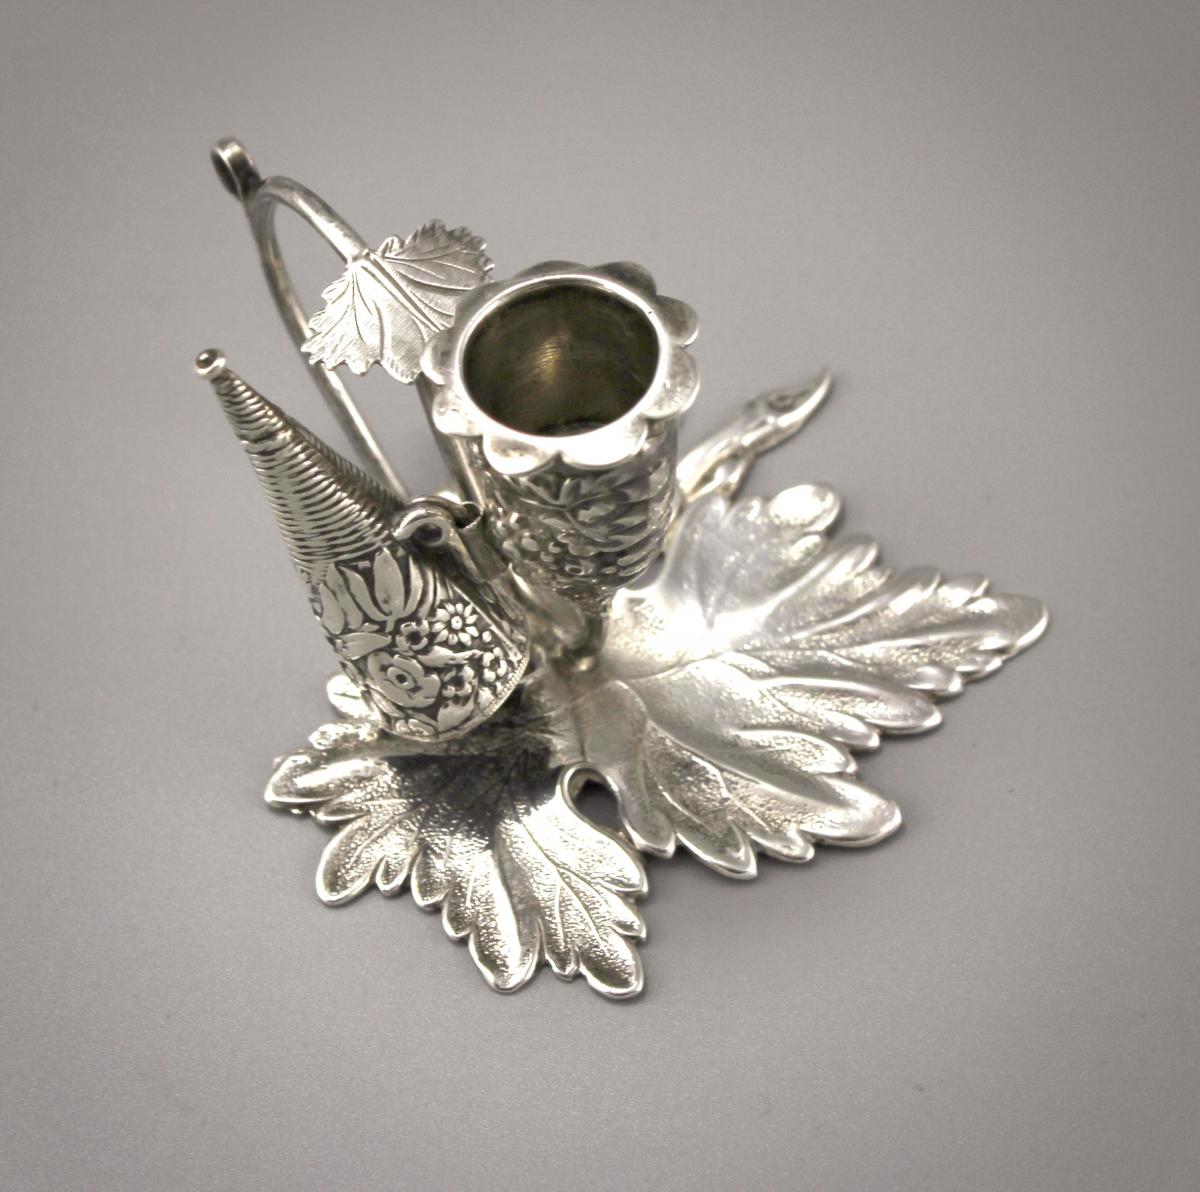 WILLIAM IV STERLING SILVER MINIATURE TAPER STICK & SNUFFER by TAYLOR & PERRY. BIRMINGHAM 1830.